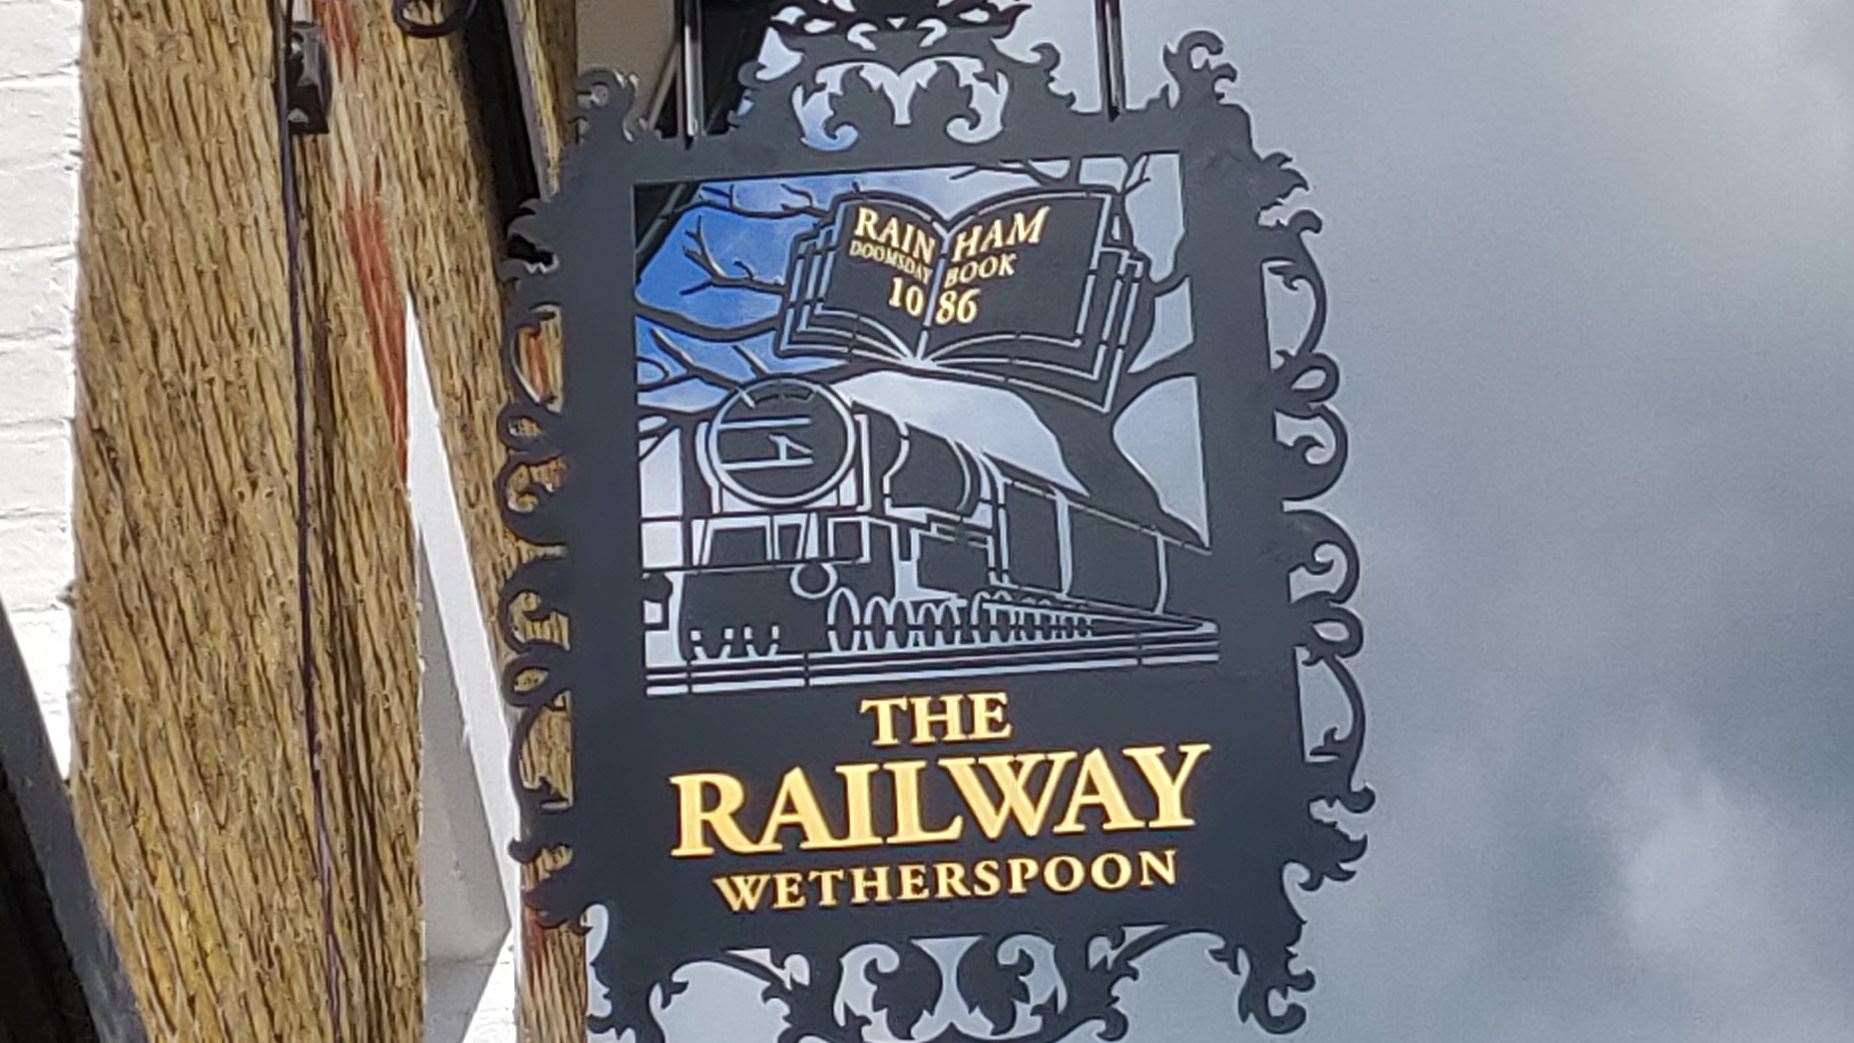 There were a couple of errors in the sign for the new Railway Pub in Rainham